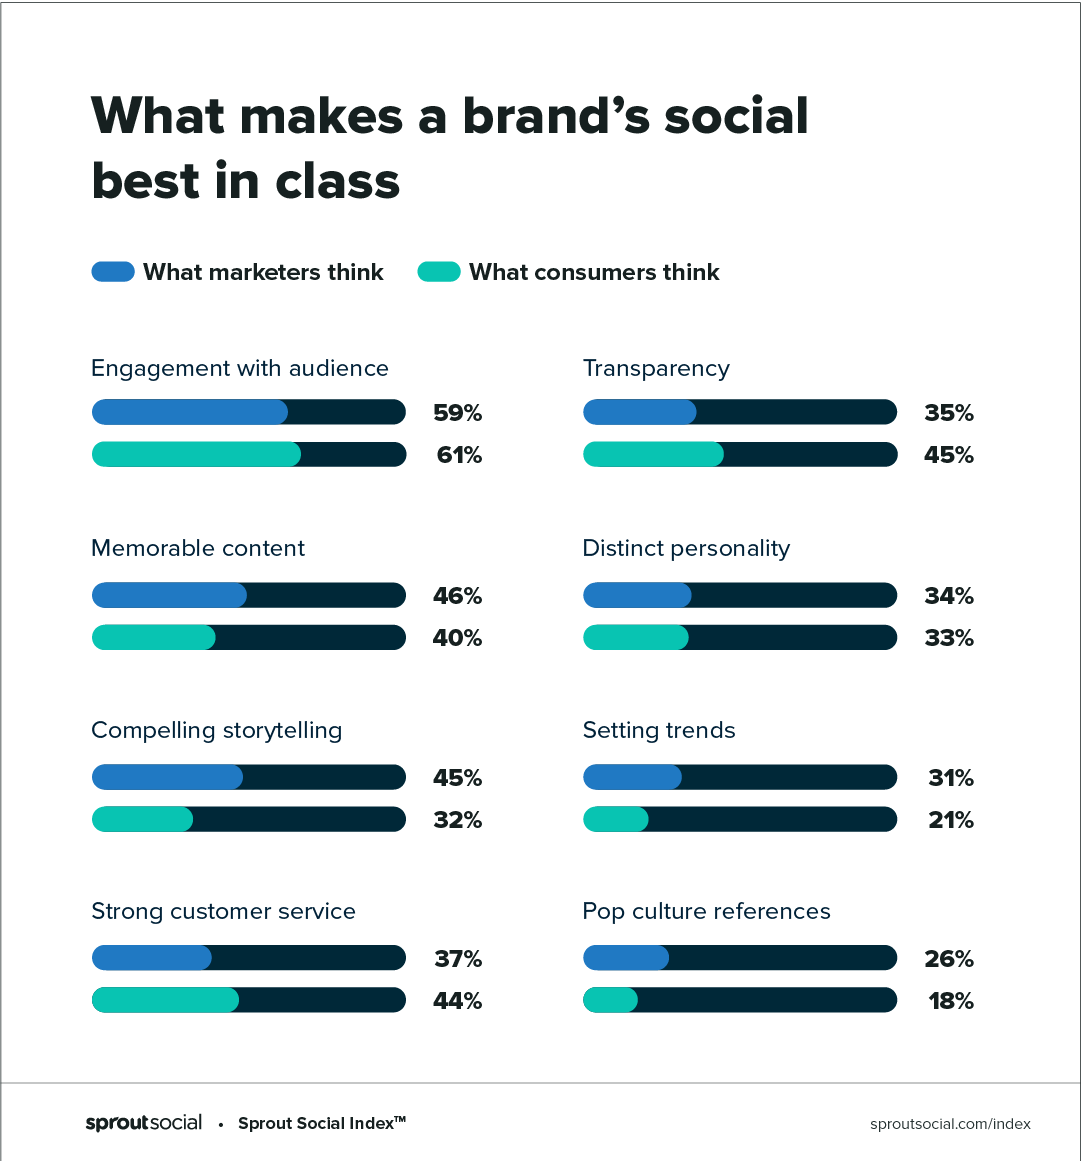 What makes a brand social